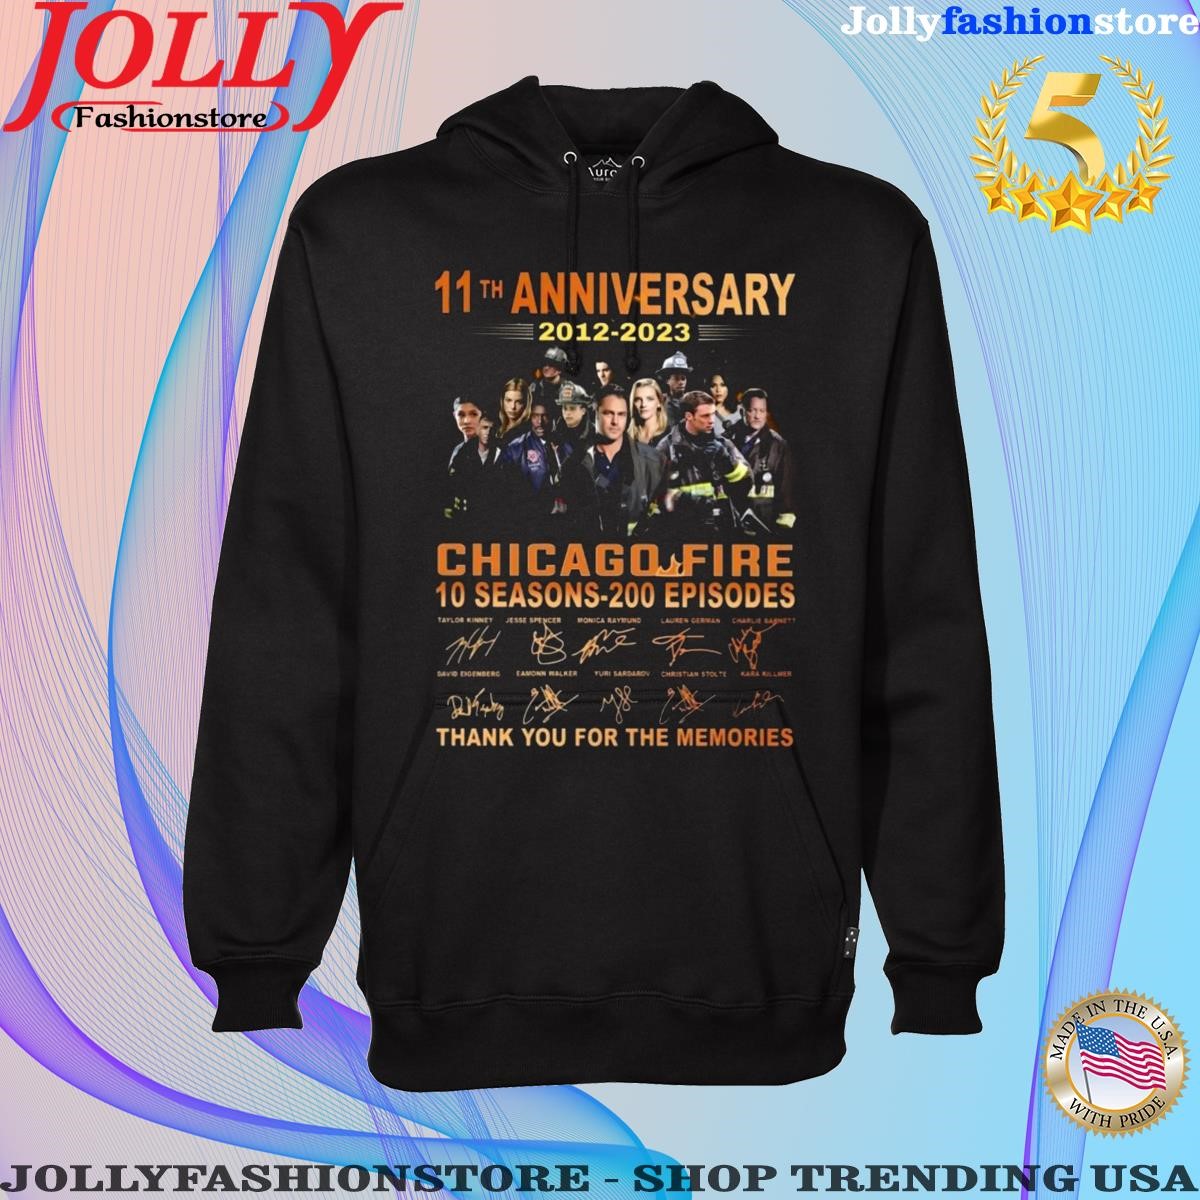 11th anniversary 2012 2023 chicago fire 10 seasons 200 episodes thank you for the memories signatures Tee Shirt Hoodie shirt.png